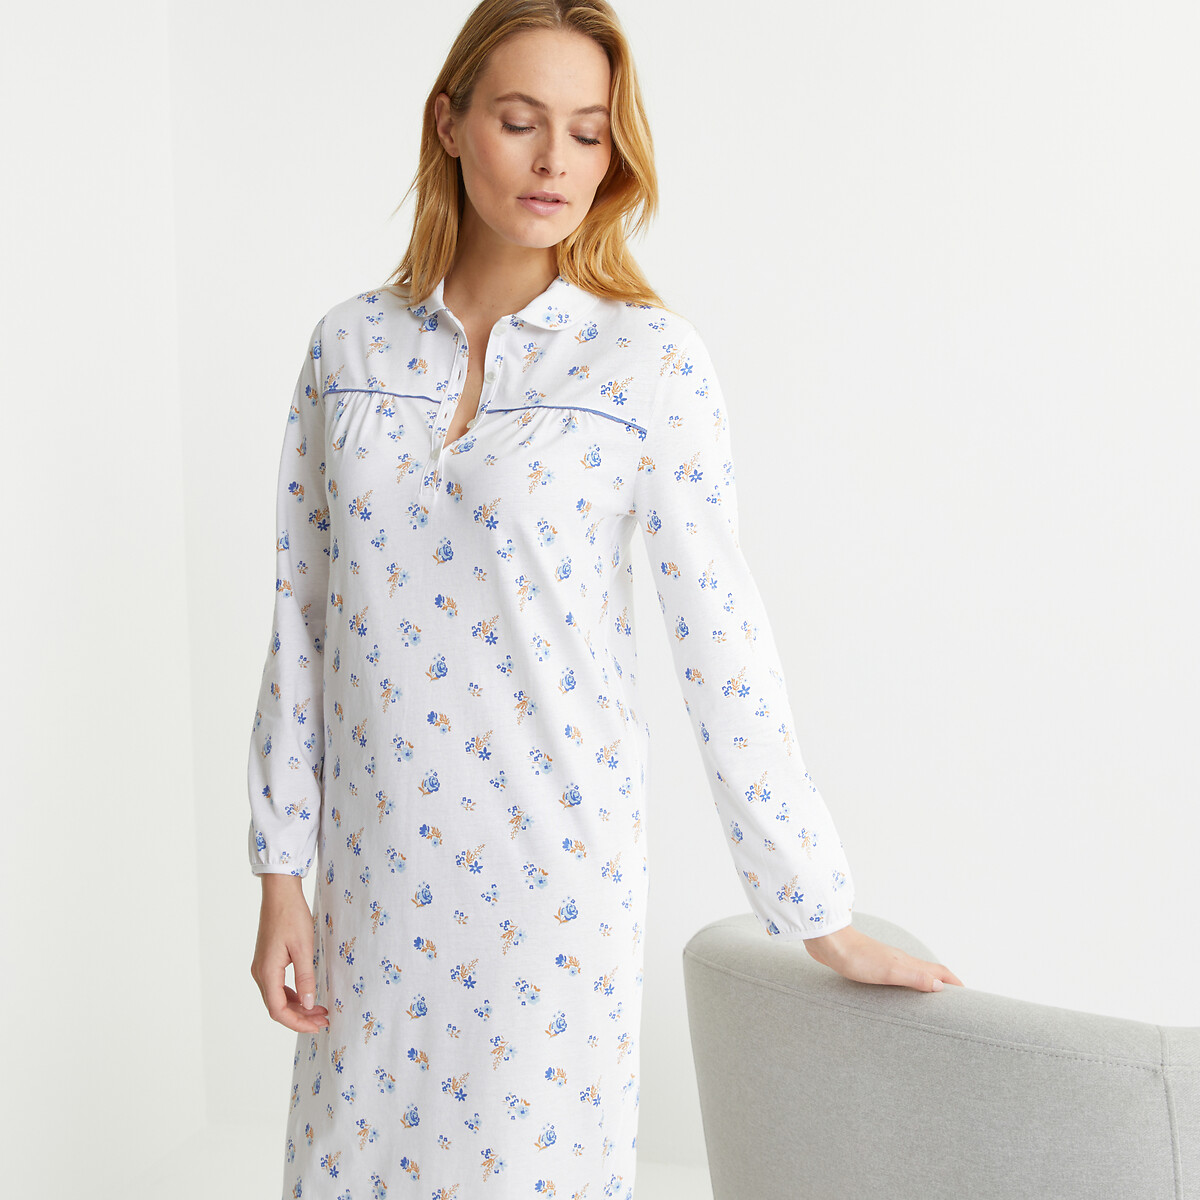 Floral Print Cotton Nightdress with Long Sleeves